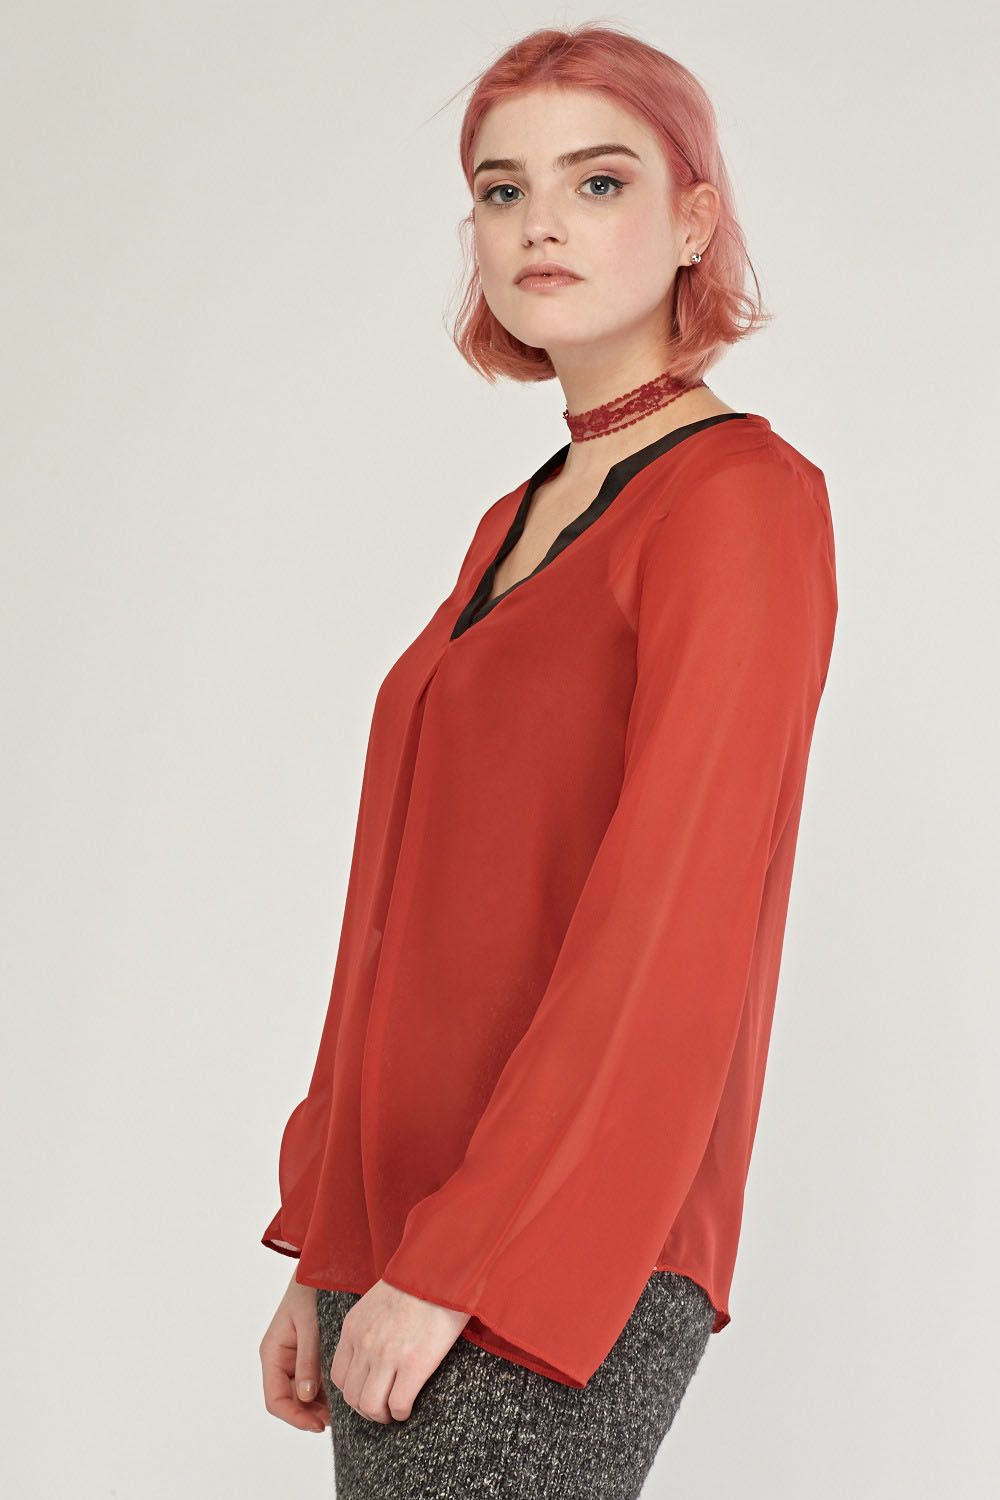 Slit Front Sheer Red Blouse - Just $3